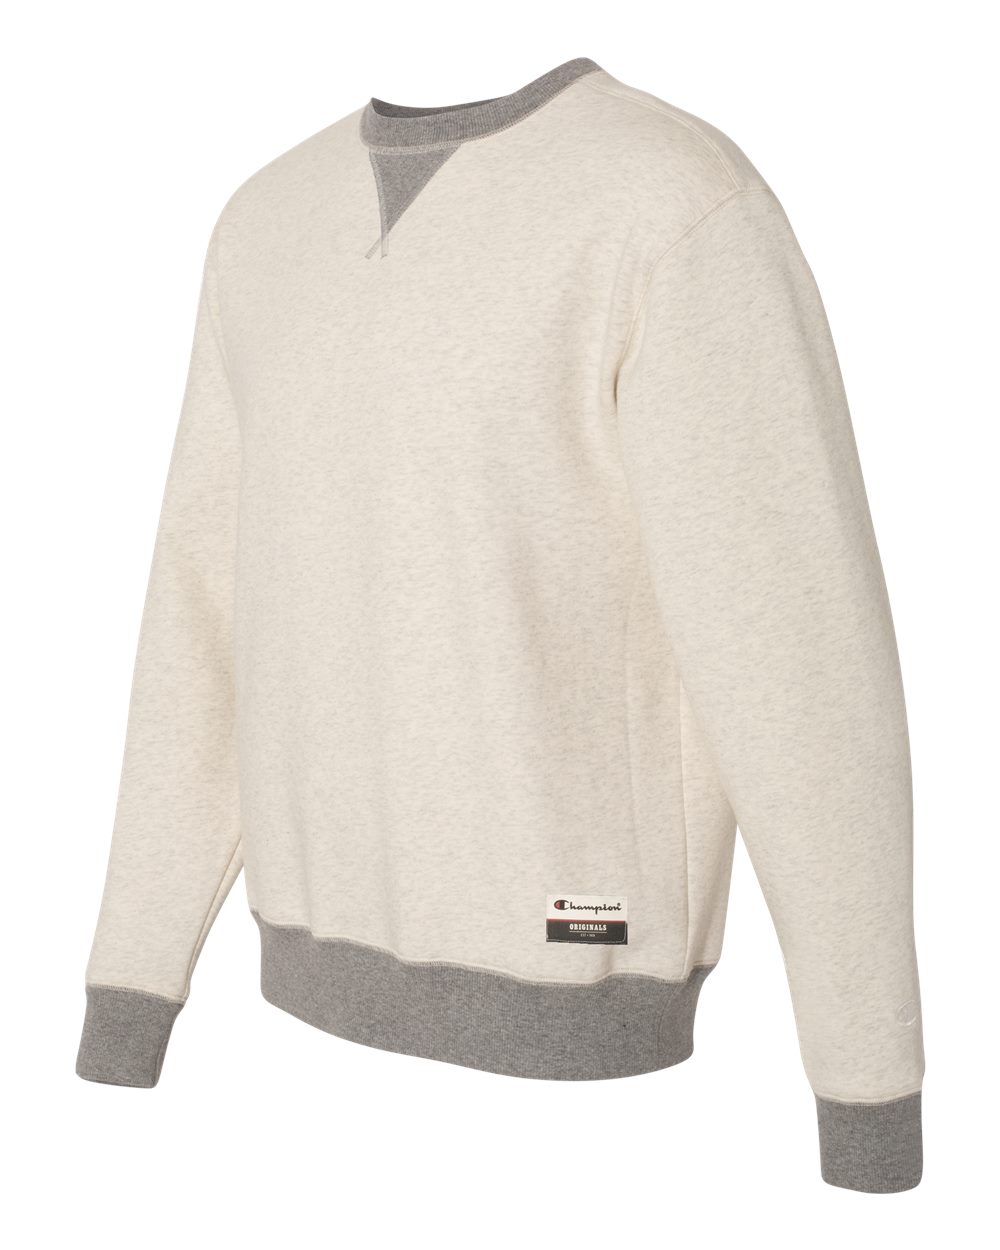 click to view Oatmeal Heather/ Oxford Grey